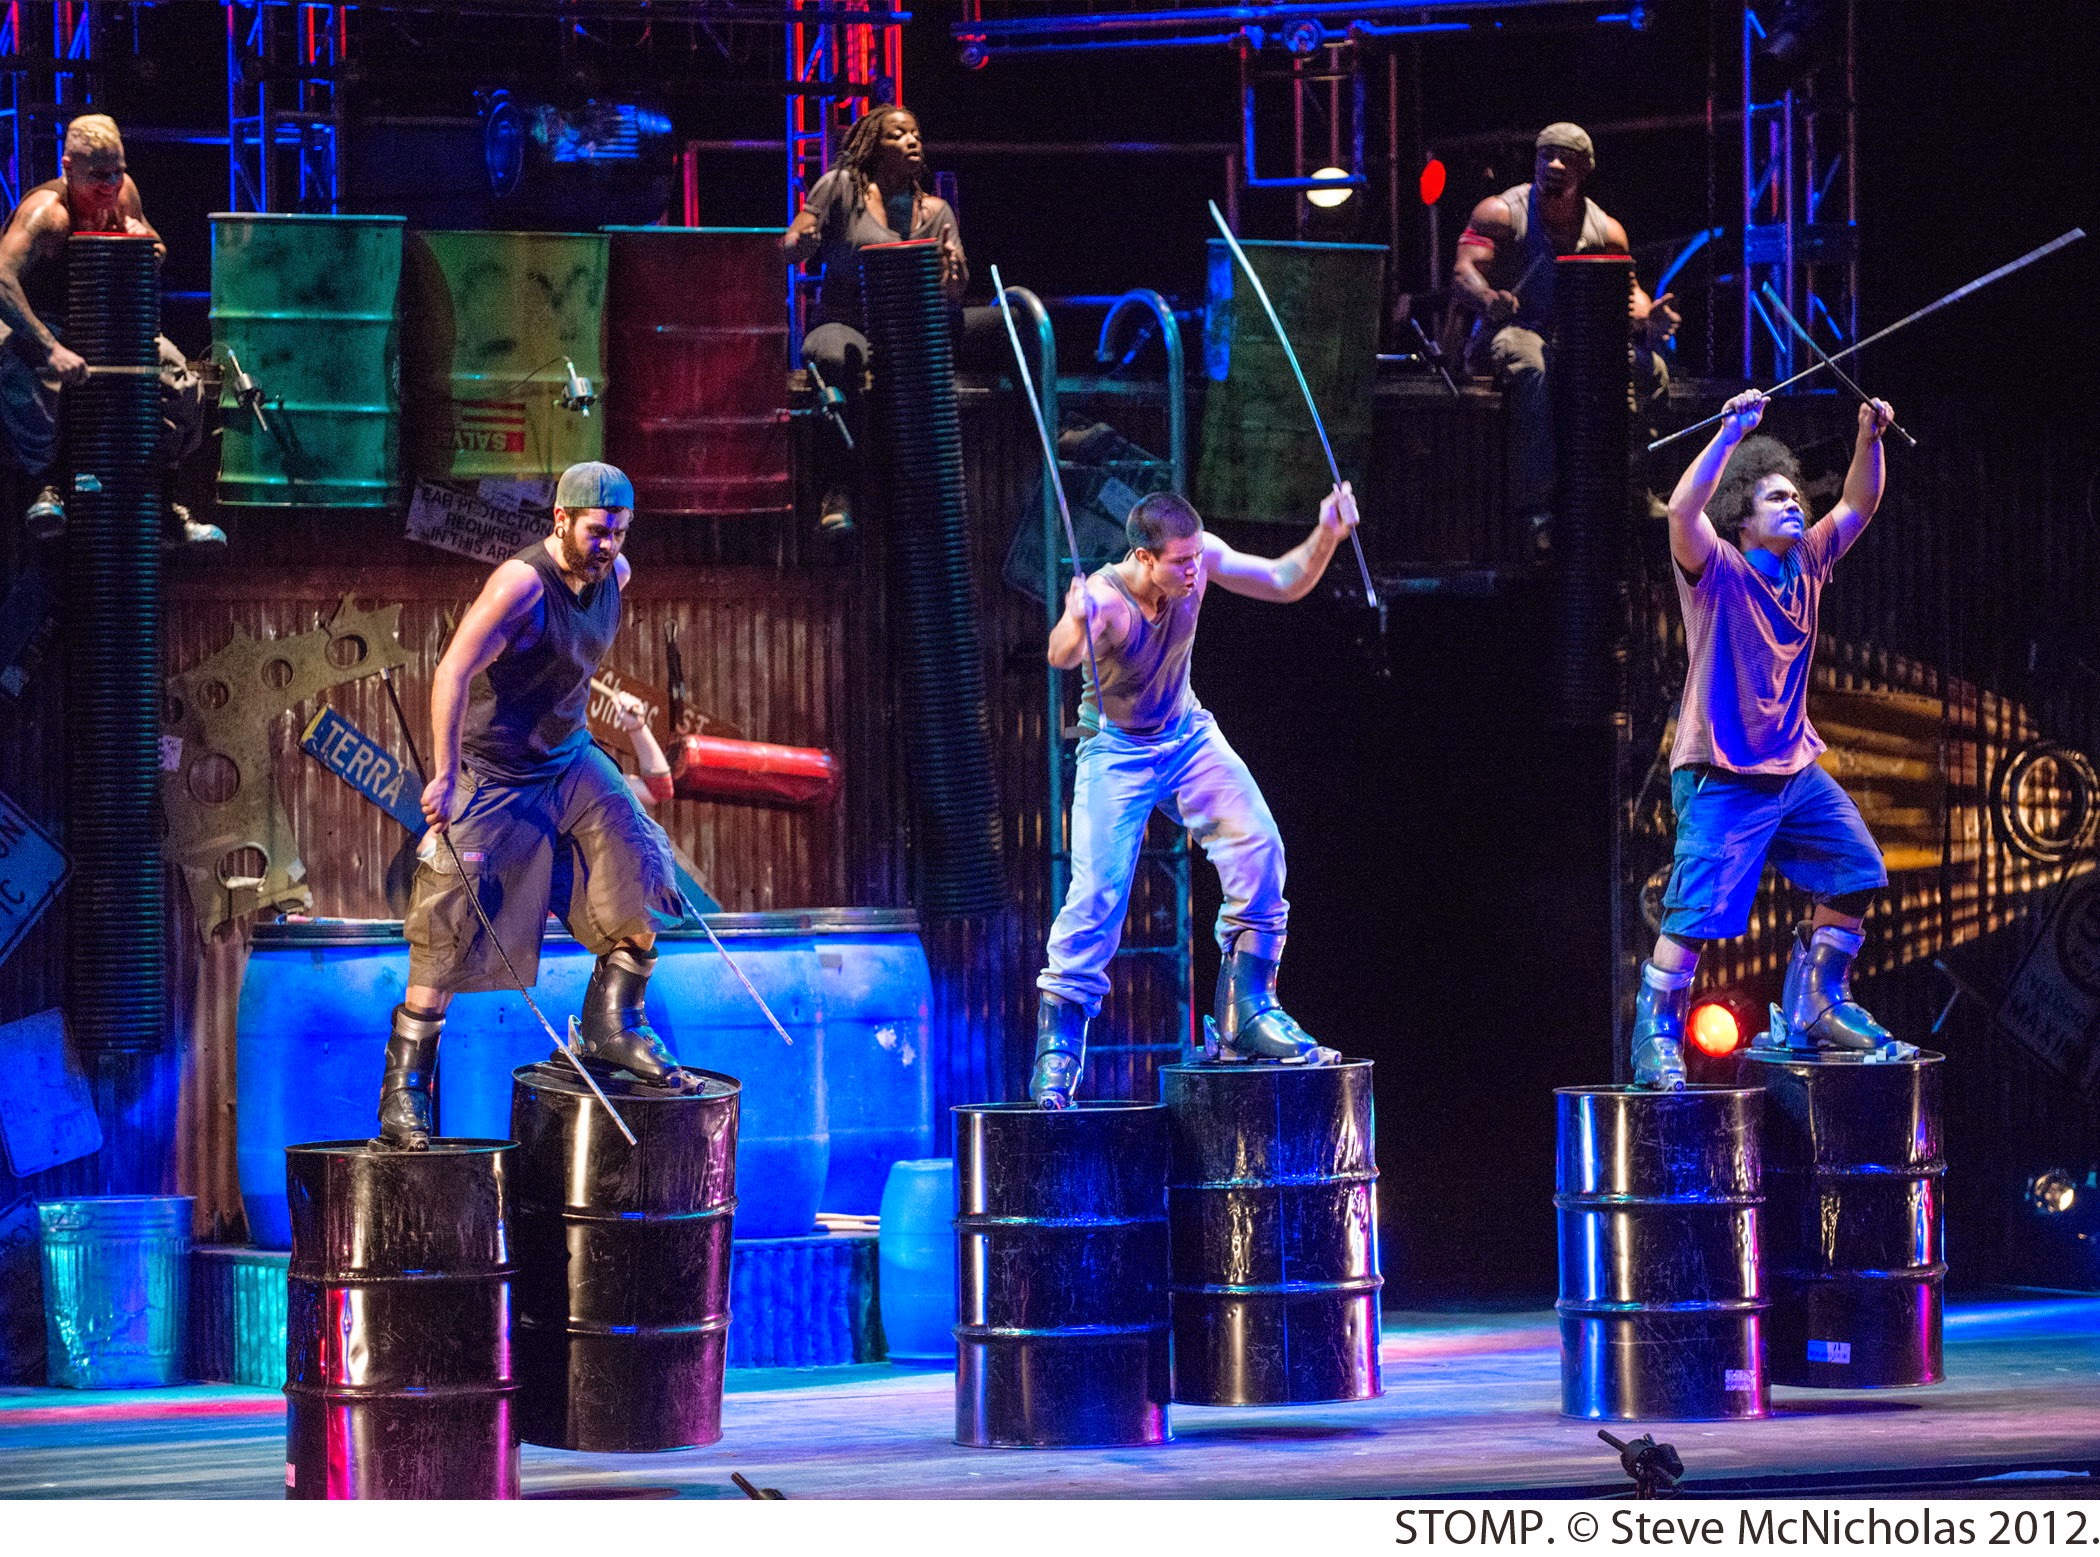 Broadway In Chicago Announces The Return of STOMP, Limited One-Week Engagement January 20-25, 2015 at the Bank of America Theatre 1 Broadway In Chicago is pleased to announce  that individual tickets for STOMP, the international percussion sensation, go on sale to the public Friday, November 28 at 10 AM. STOMP returns to Chicago by popular demand for a limited one-week engagement at the Bank of America Theatre (18 W. Monroe) January 20 – 25, 2015.  From its beginnings as a street performance in the UK, STOMP has grown into an international sensation over the past 20 years, having performed in more than 50 countries and in front of more than 24 million people. 